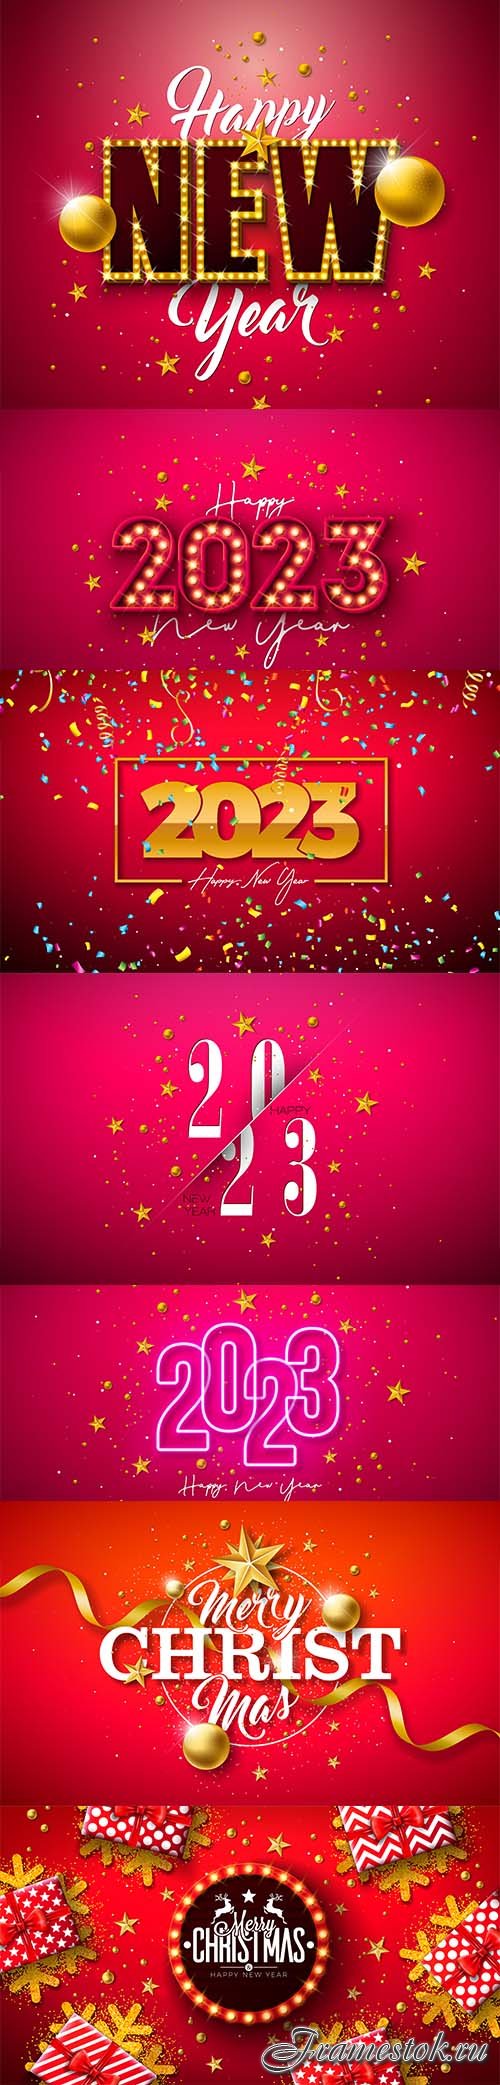 Merry christmas and happy new year 2023 illustration with gold glass ball